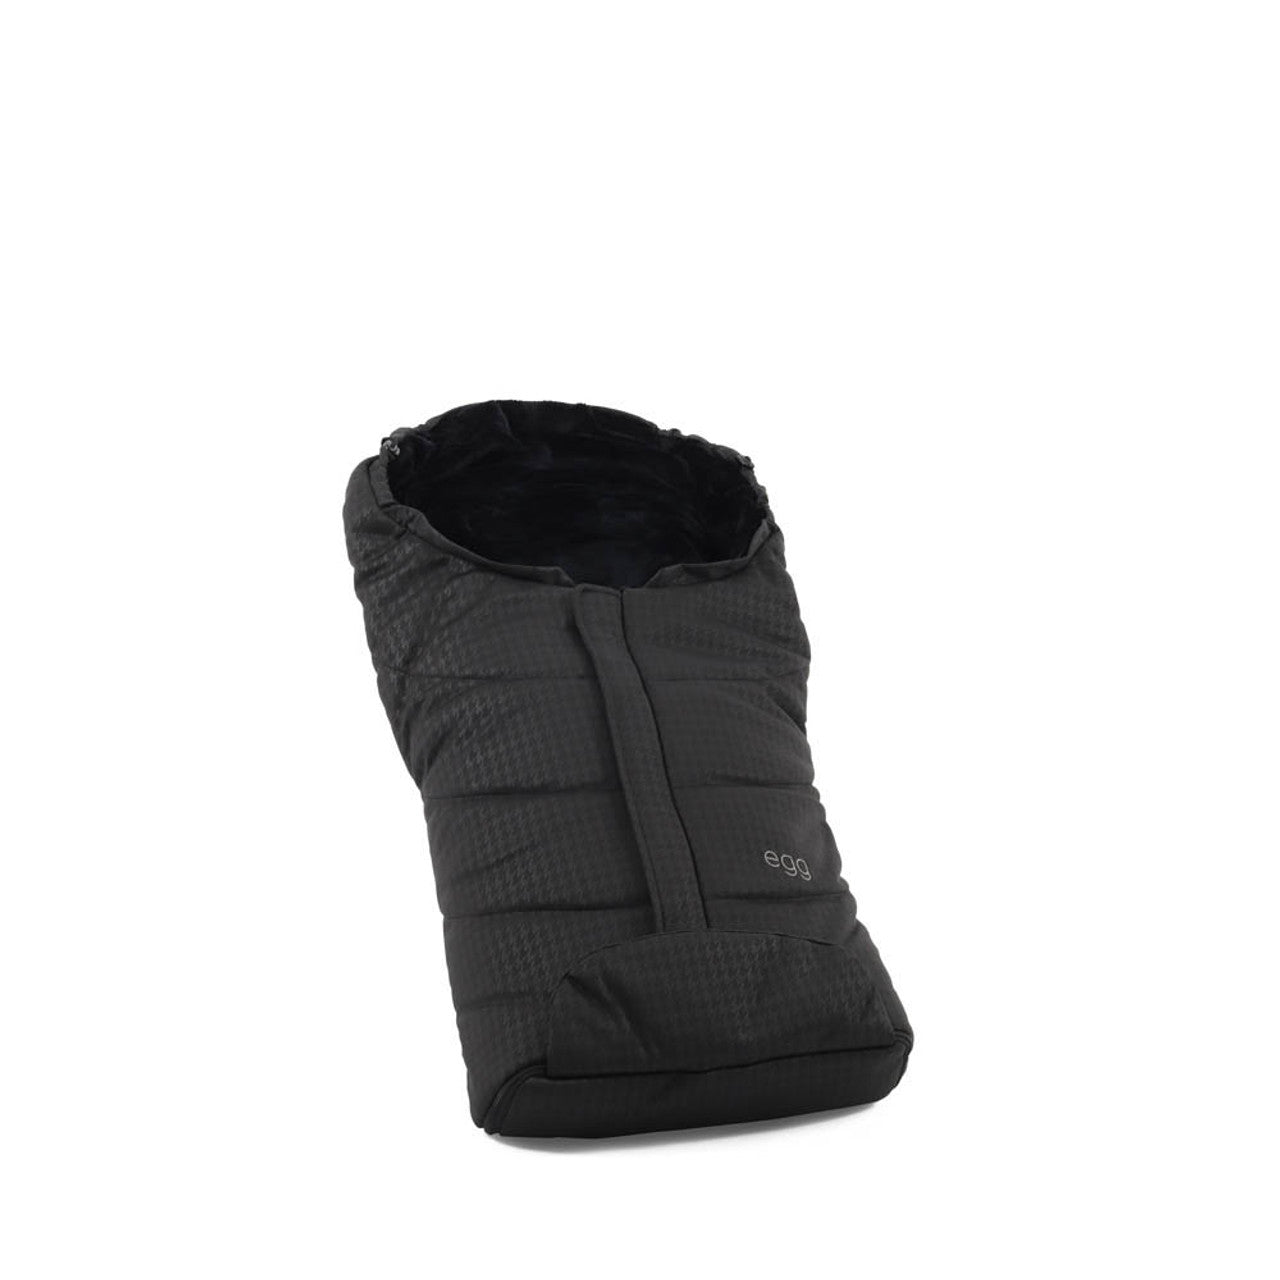 Egg® 3 Footmuff - Houndstooth Black -  | For Your Little One